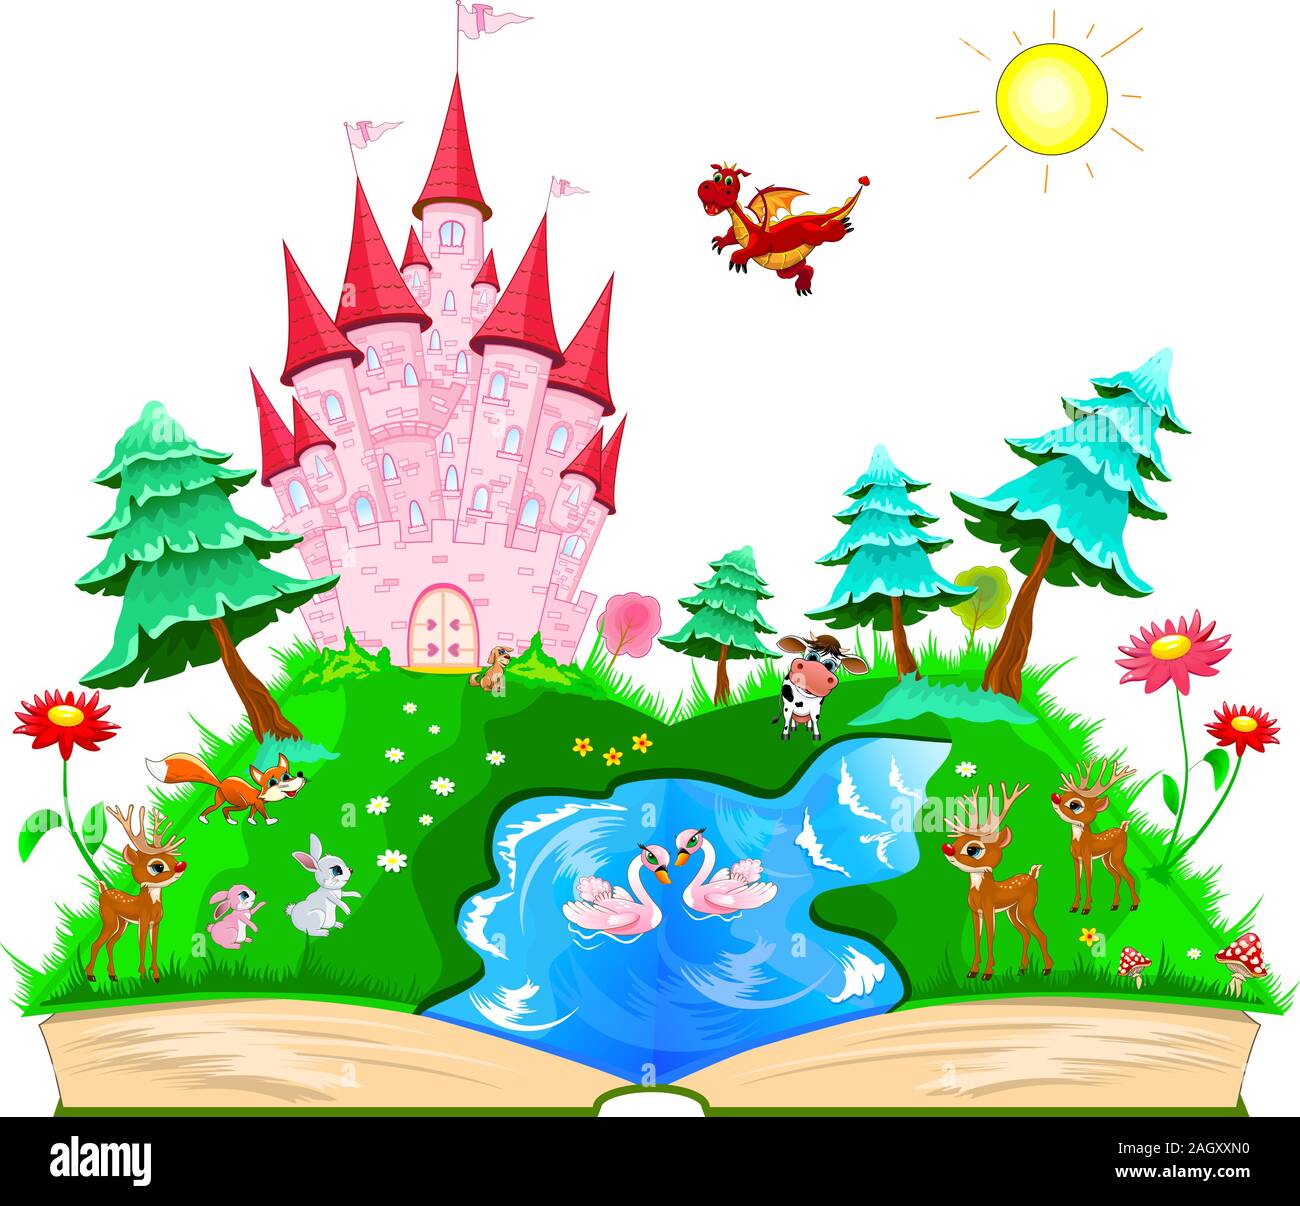 Open fairytale book. On the pages of a pink castle, various animals, a river, a forest and flowers. Stock Vector